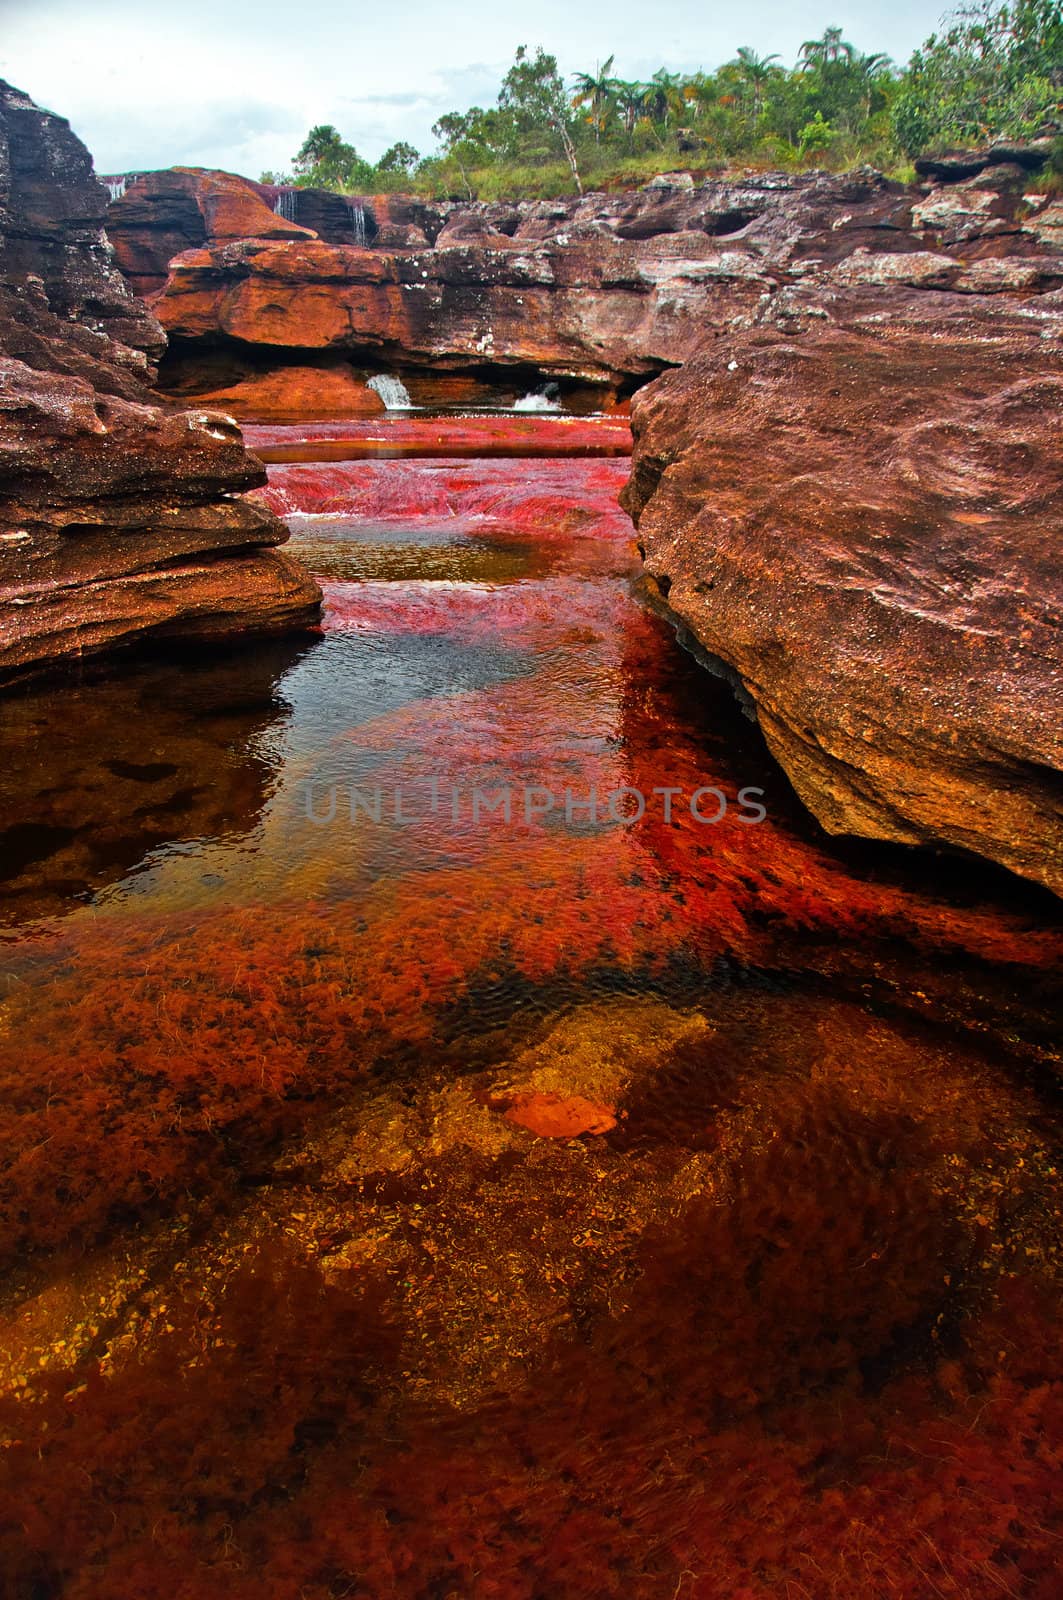 Cano Cristales, The Seven Colored River by jkraft5